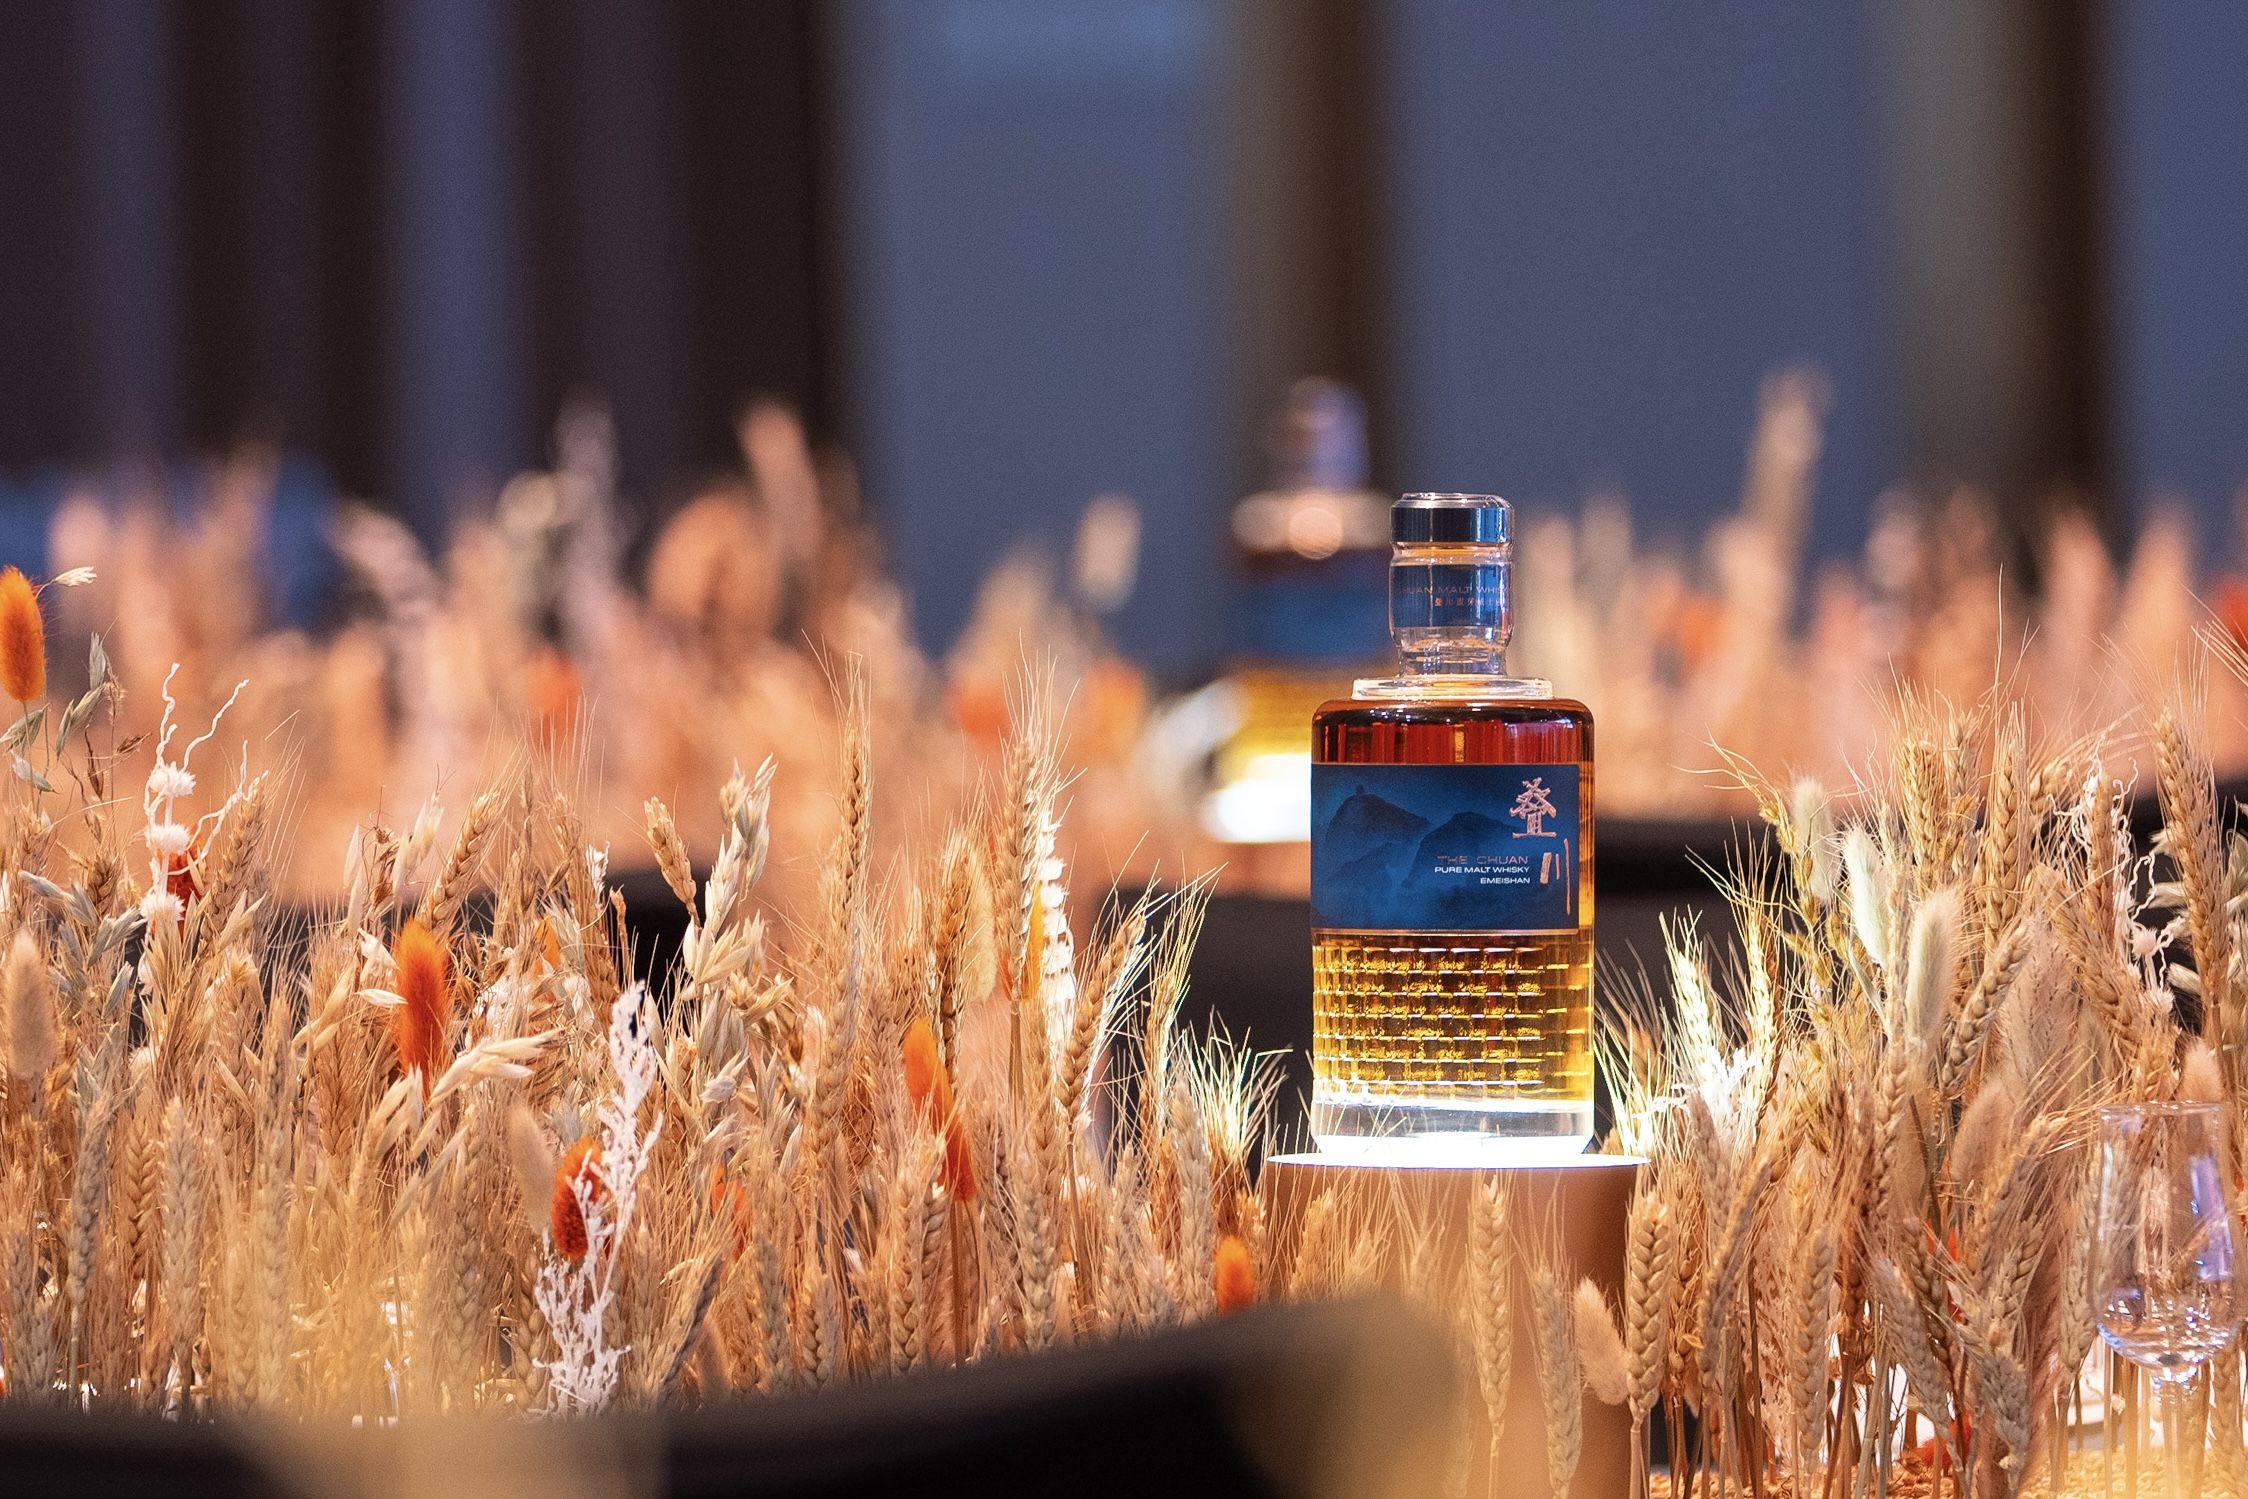 Alcohol Brand Name Creation for Pernod Ricard Group's New Malt Whisky Distillery - THE CHUAN